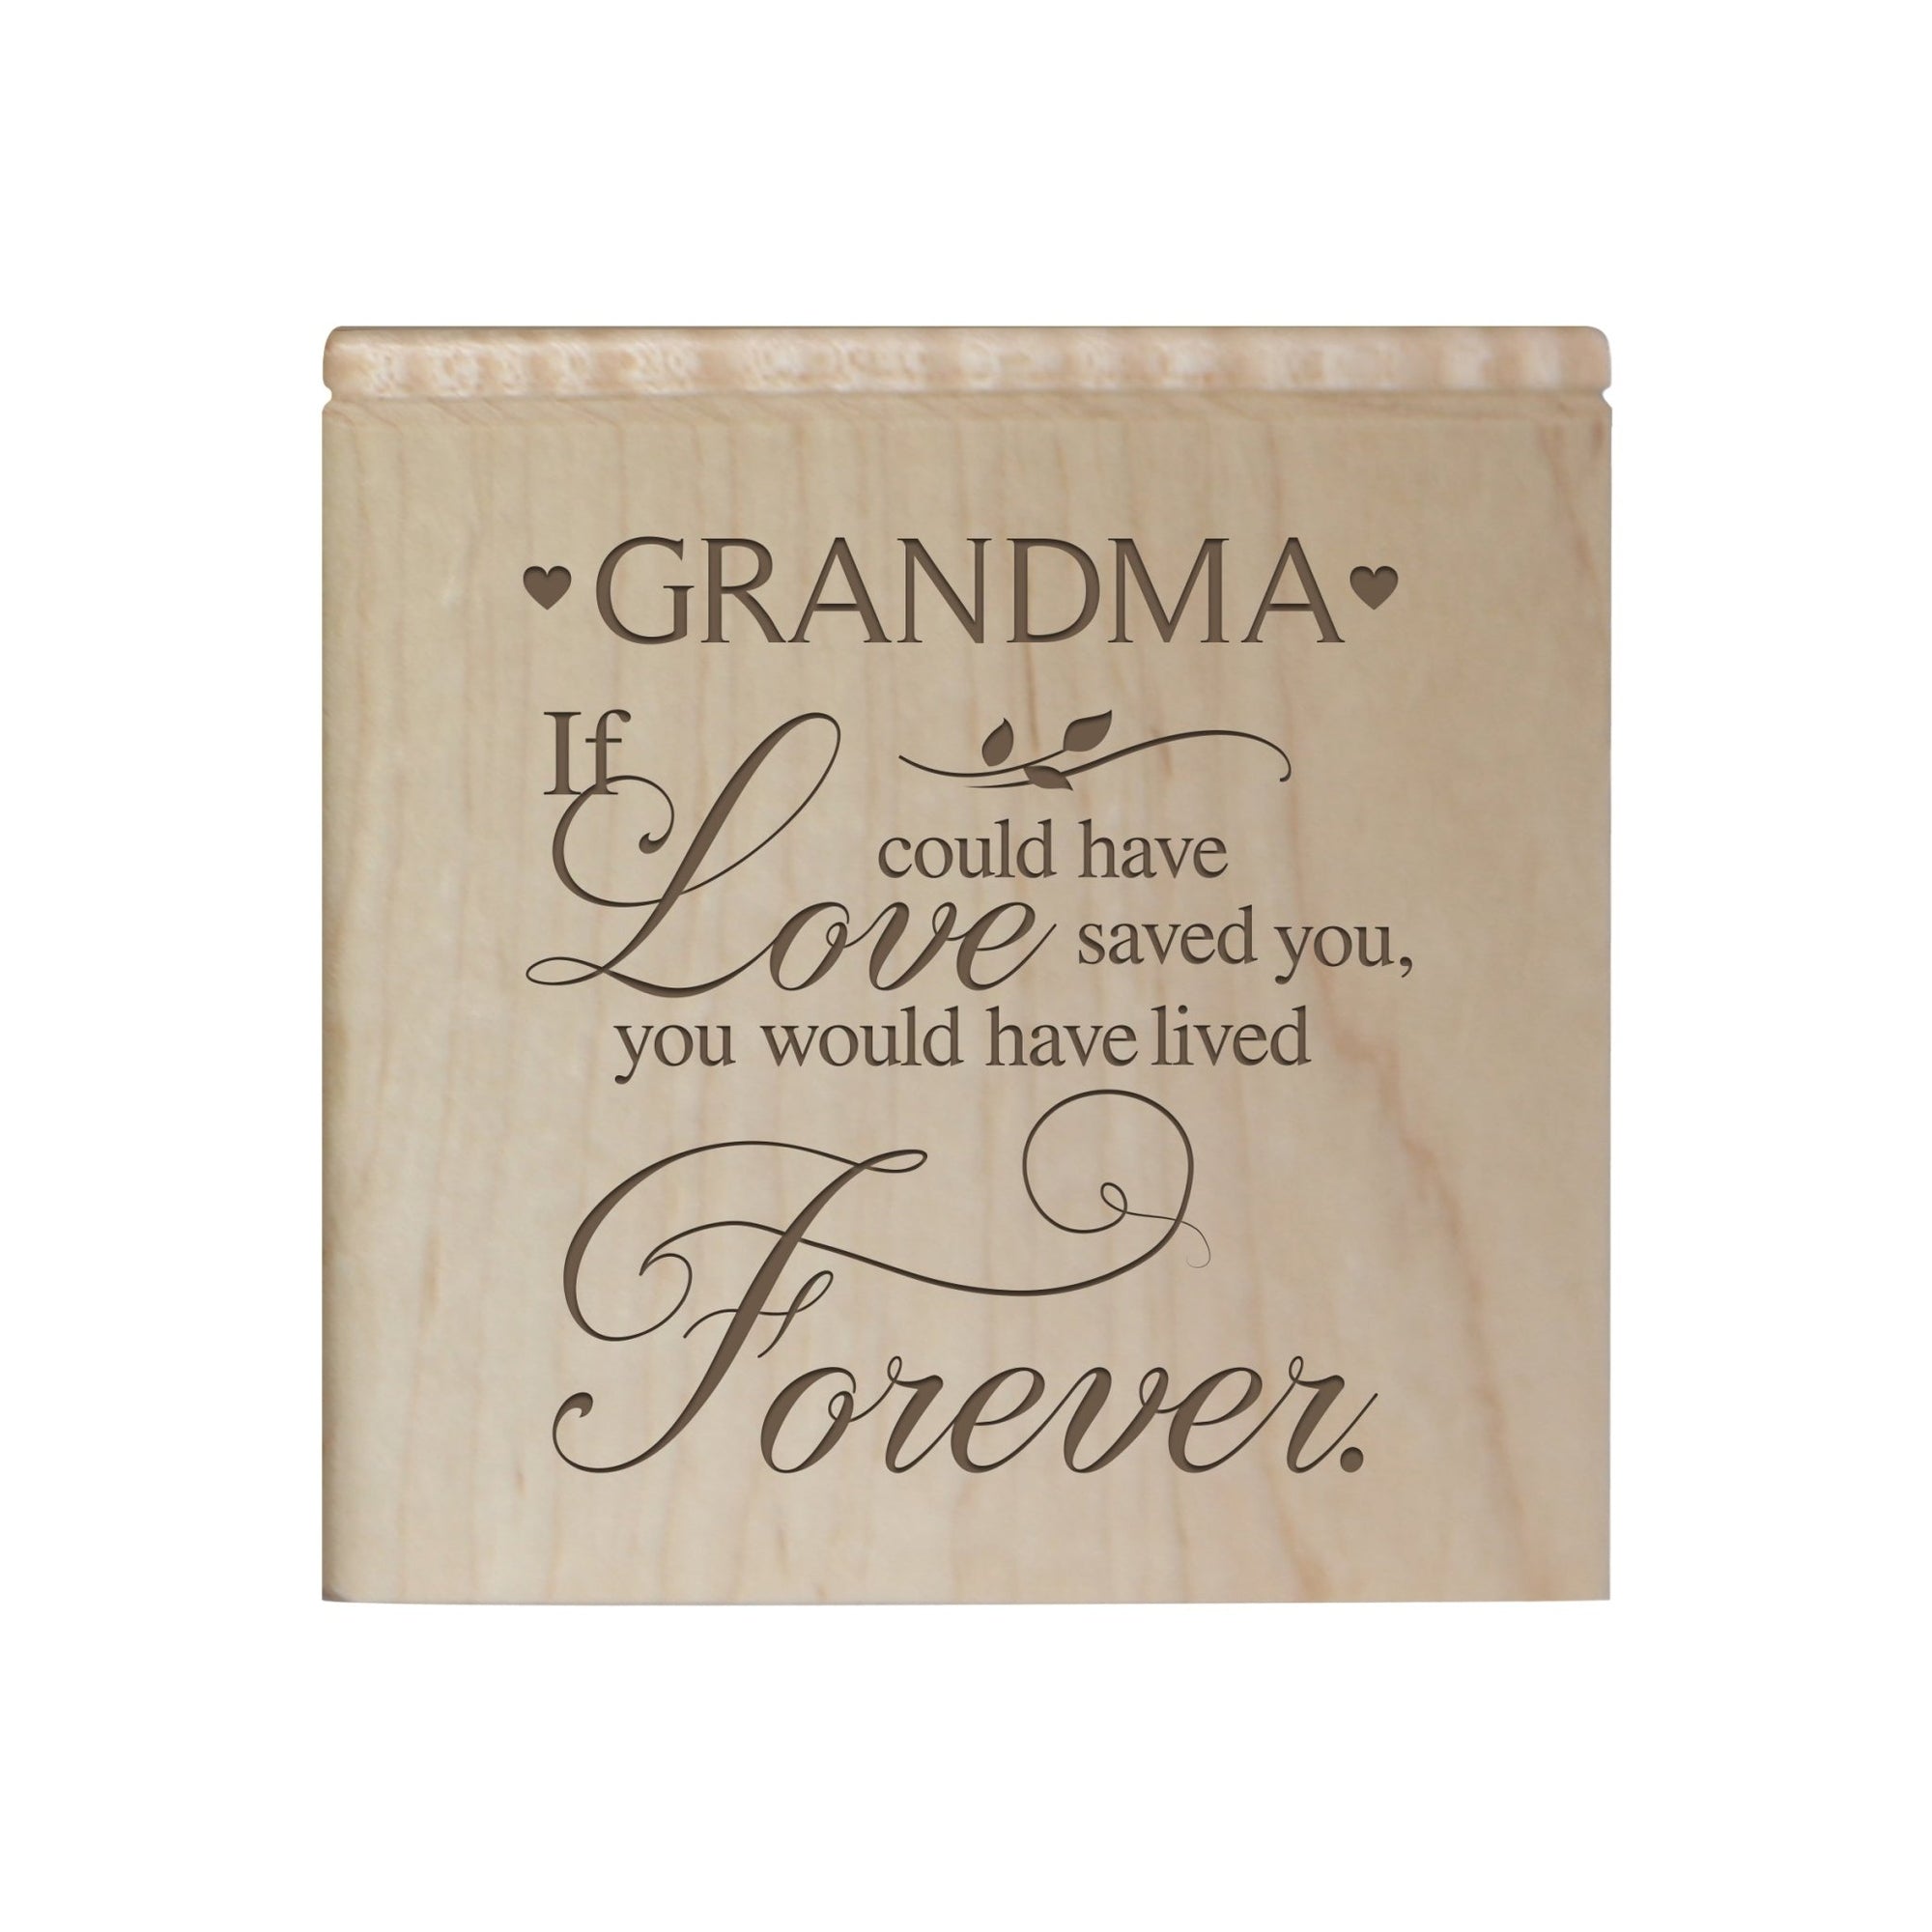 Modern Inspirational Memorial Wooden Cremation Urn Box 4.5x4.5in Holds 49 Cu Inches Of Human Ashes (If love could have saved Grandma) Funeral and Commemorative Keepsake - LifeSong Milestones